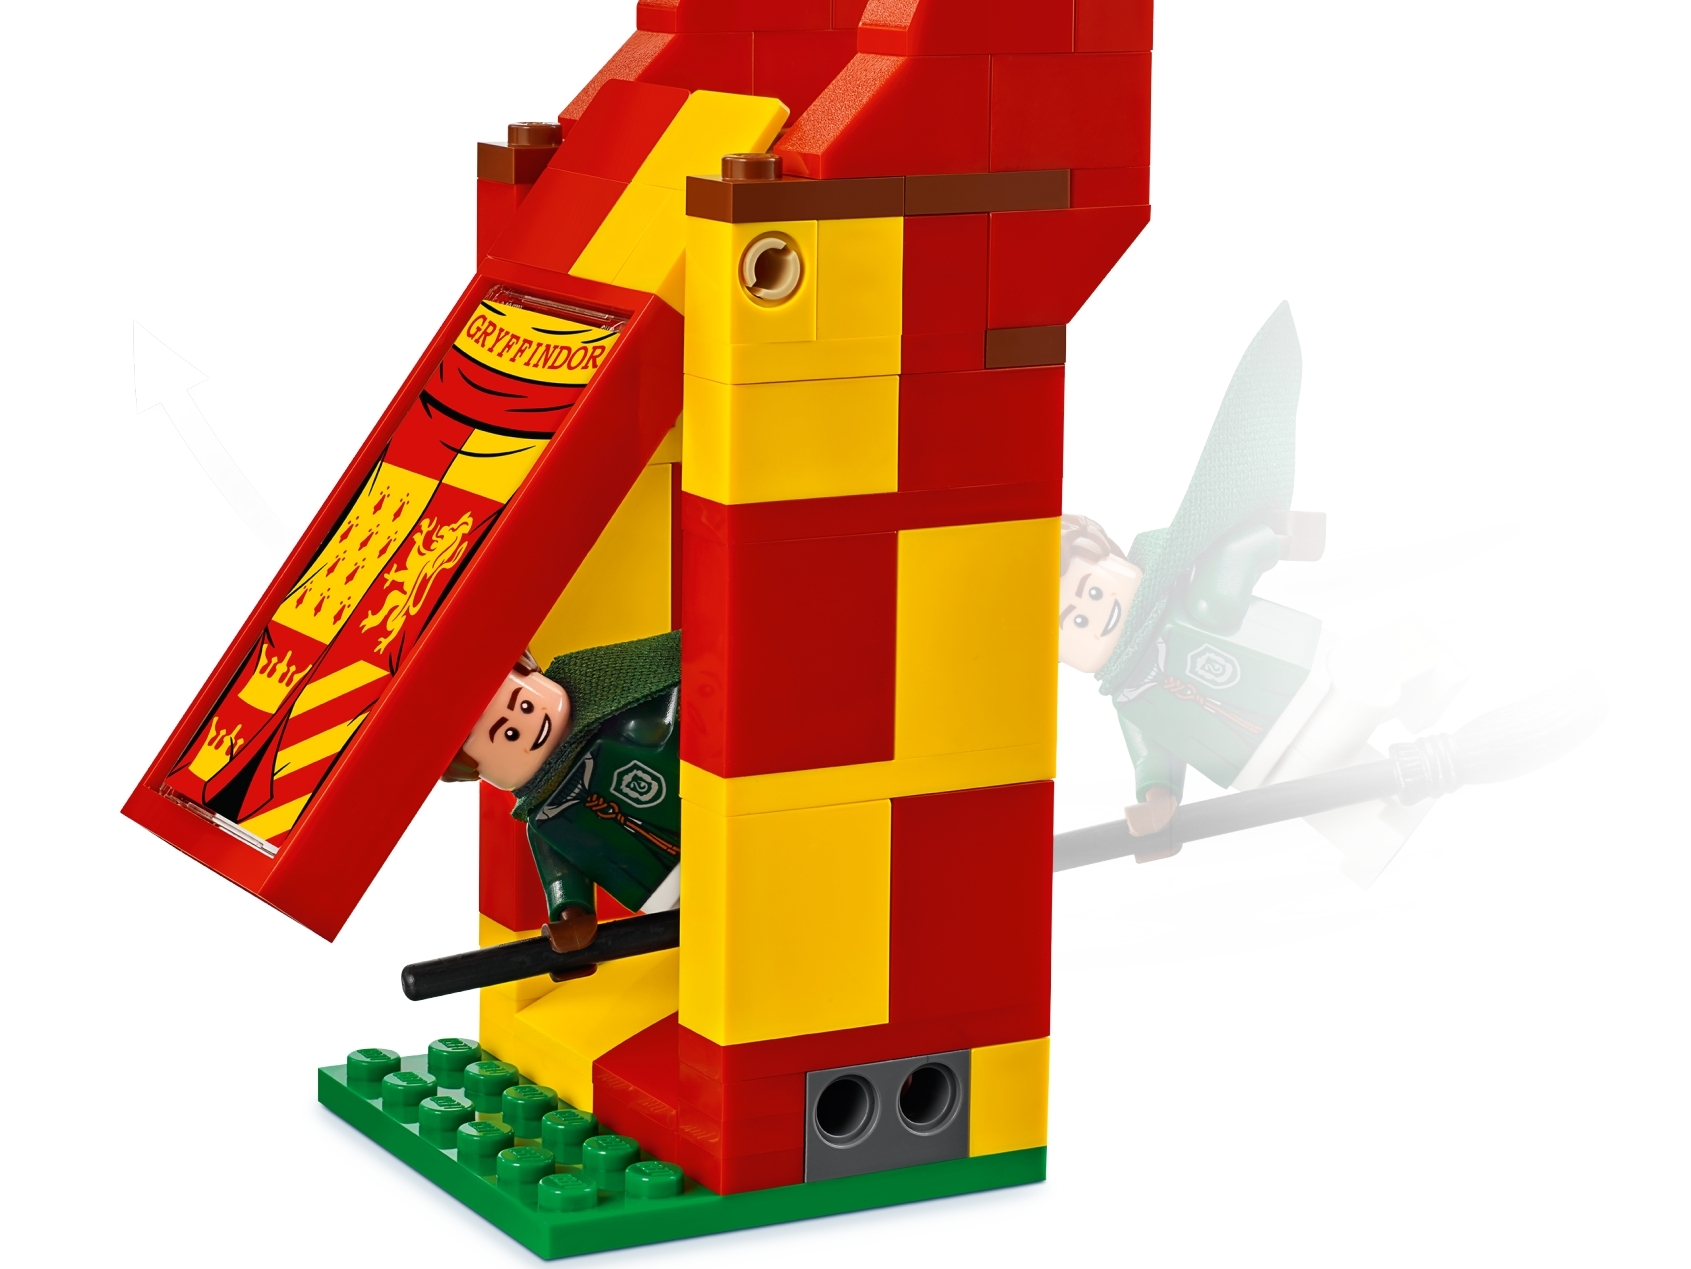 75956 for sale online Lego Harry Potter Quidditch Match